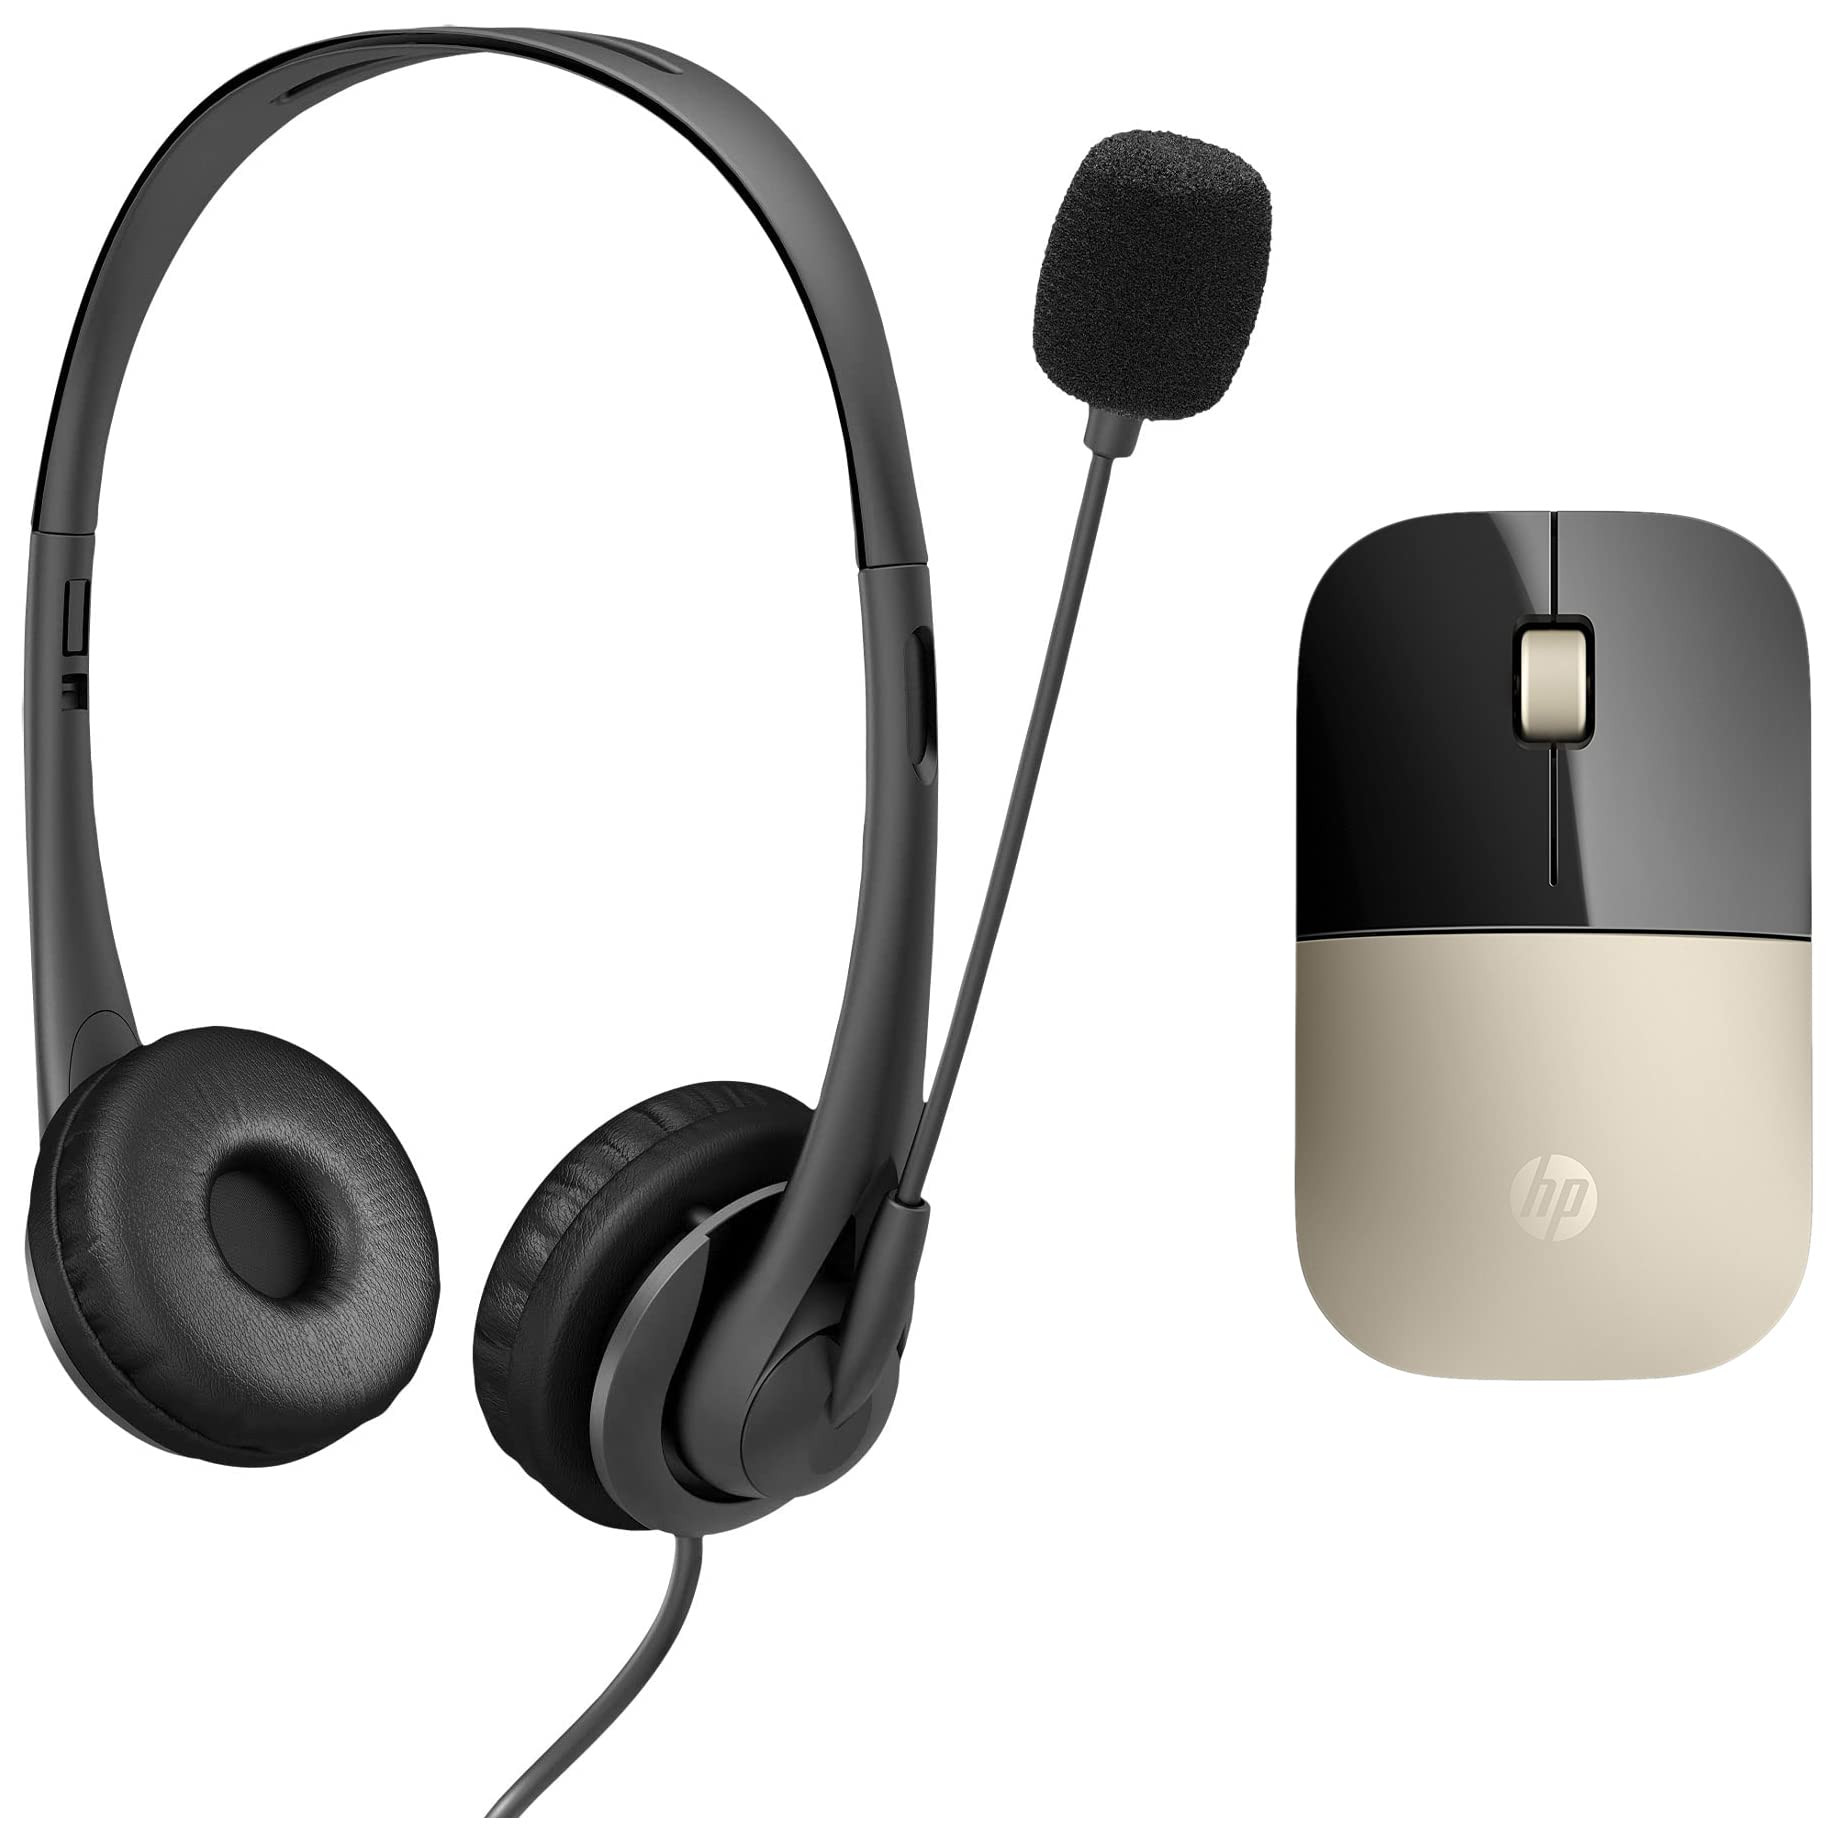 HP Stereo 3.5Mm G2 Wired Ear Leather Over Volume with Headphones Vegan Mic, with Earcups